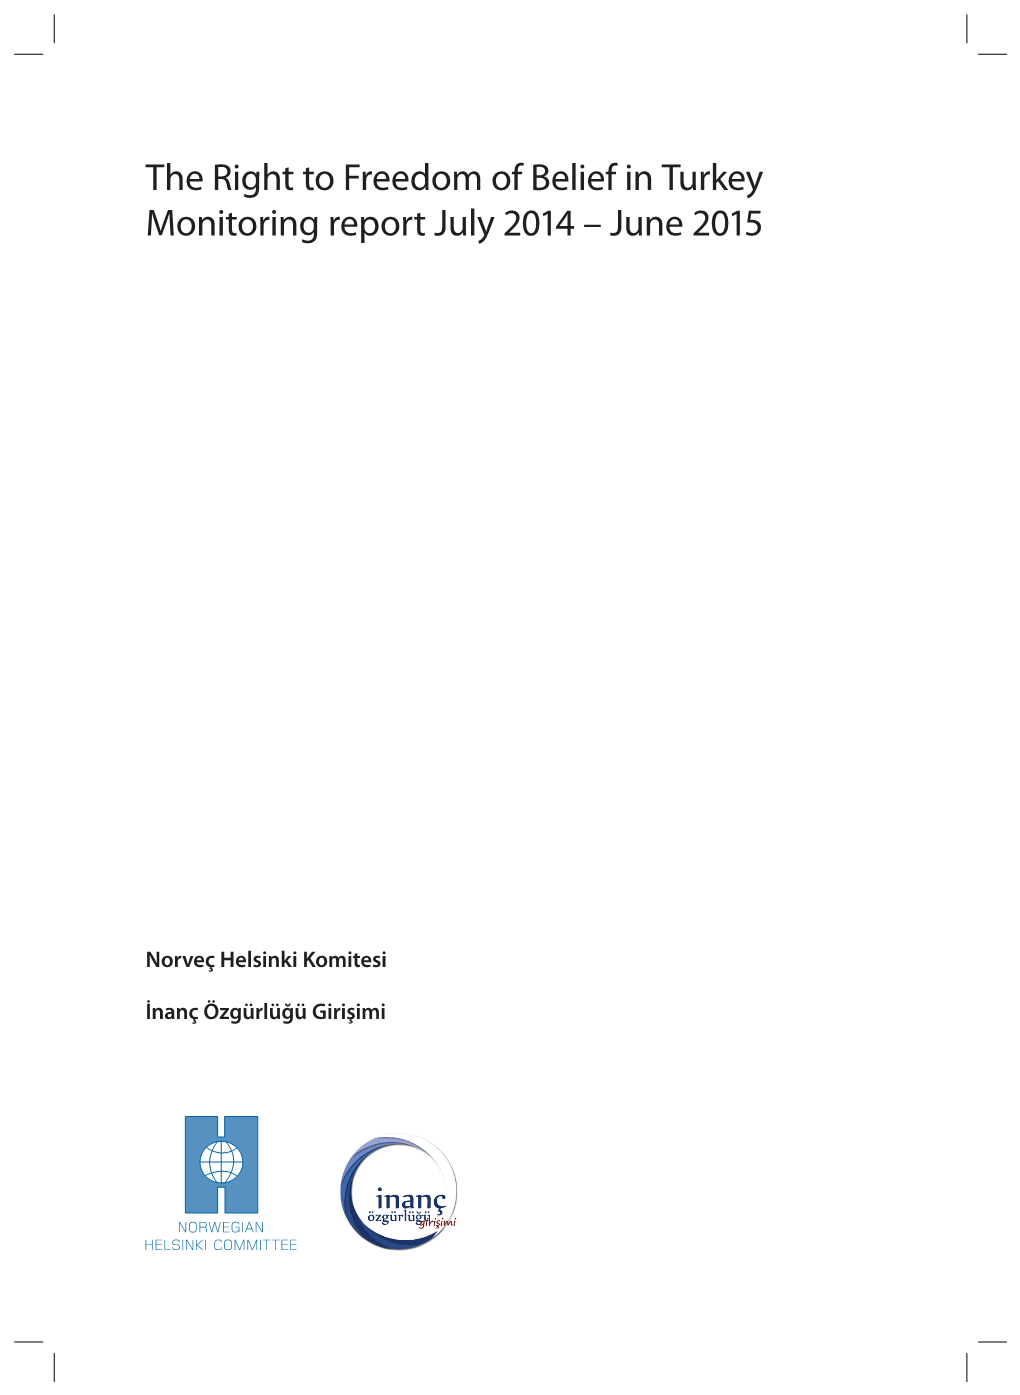 The Right to Freedom of Belief in Turkey Monitoring Report July 2014 – June 2015